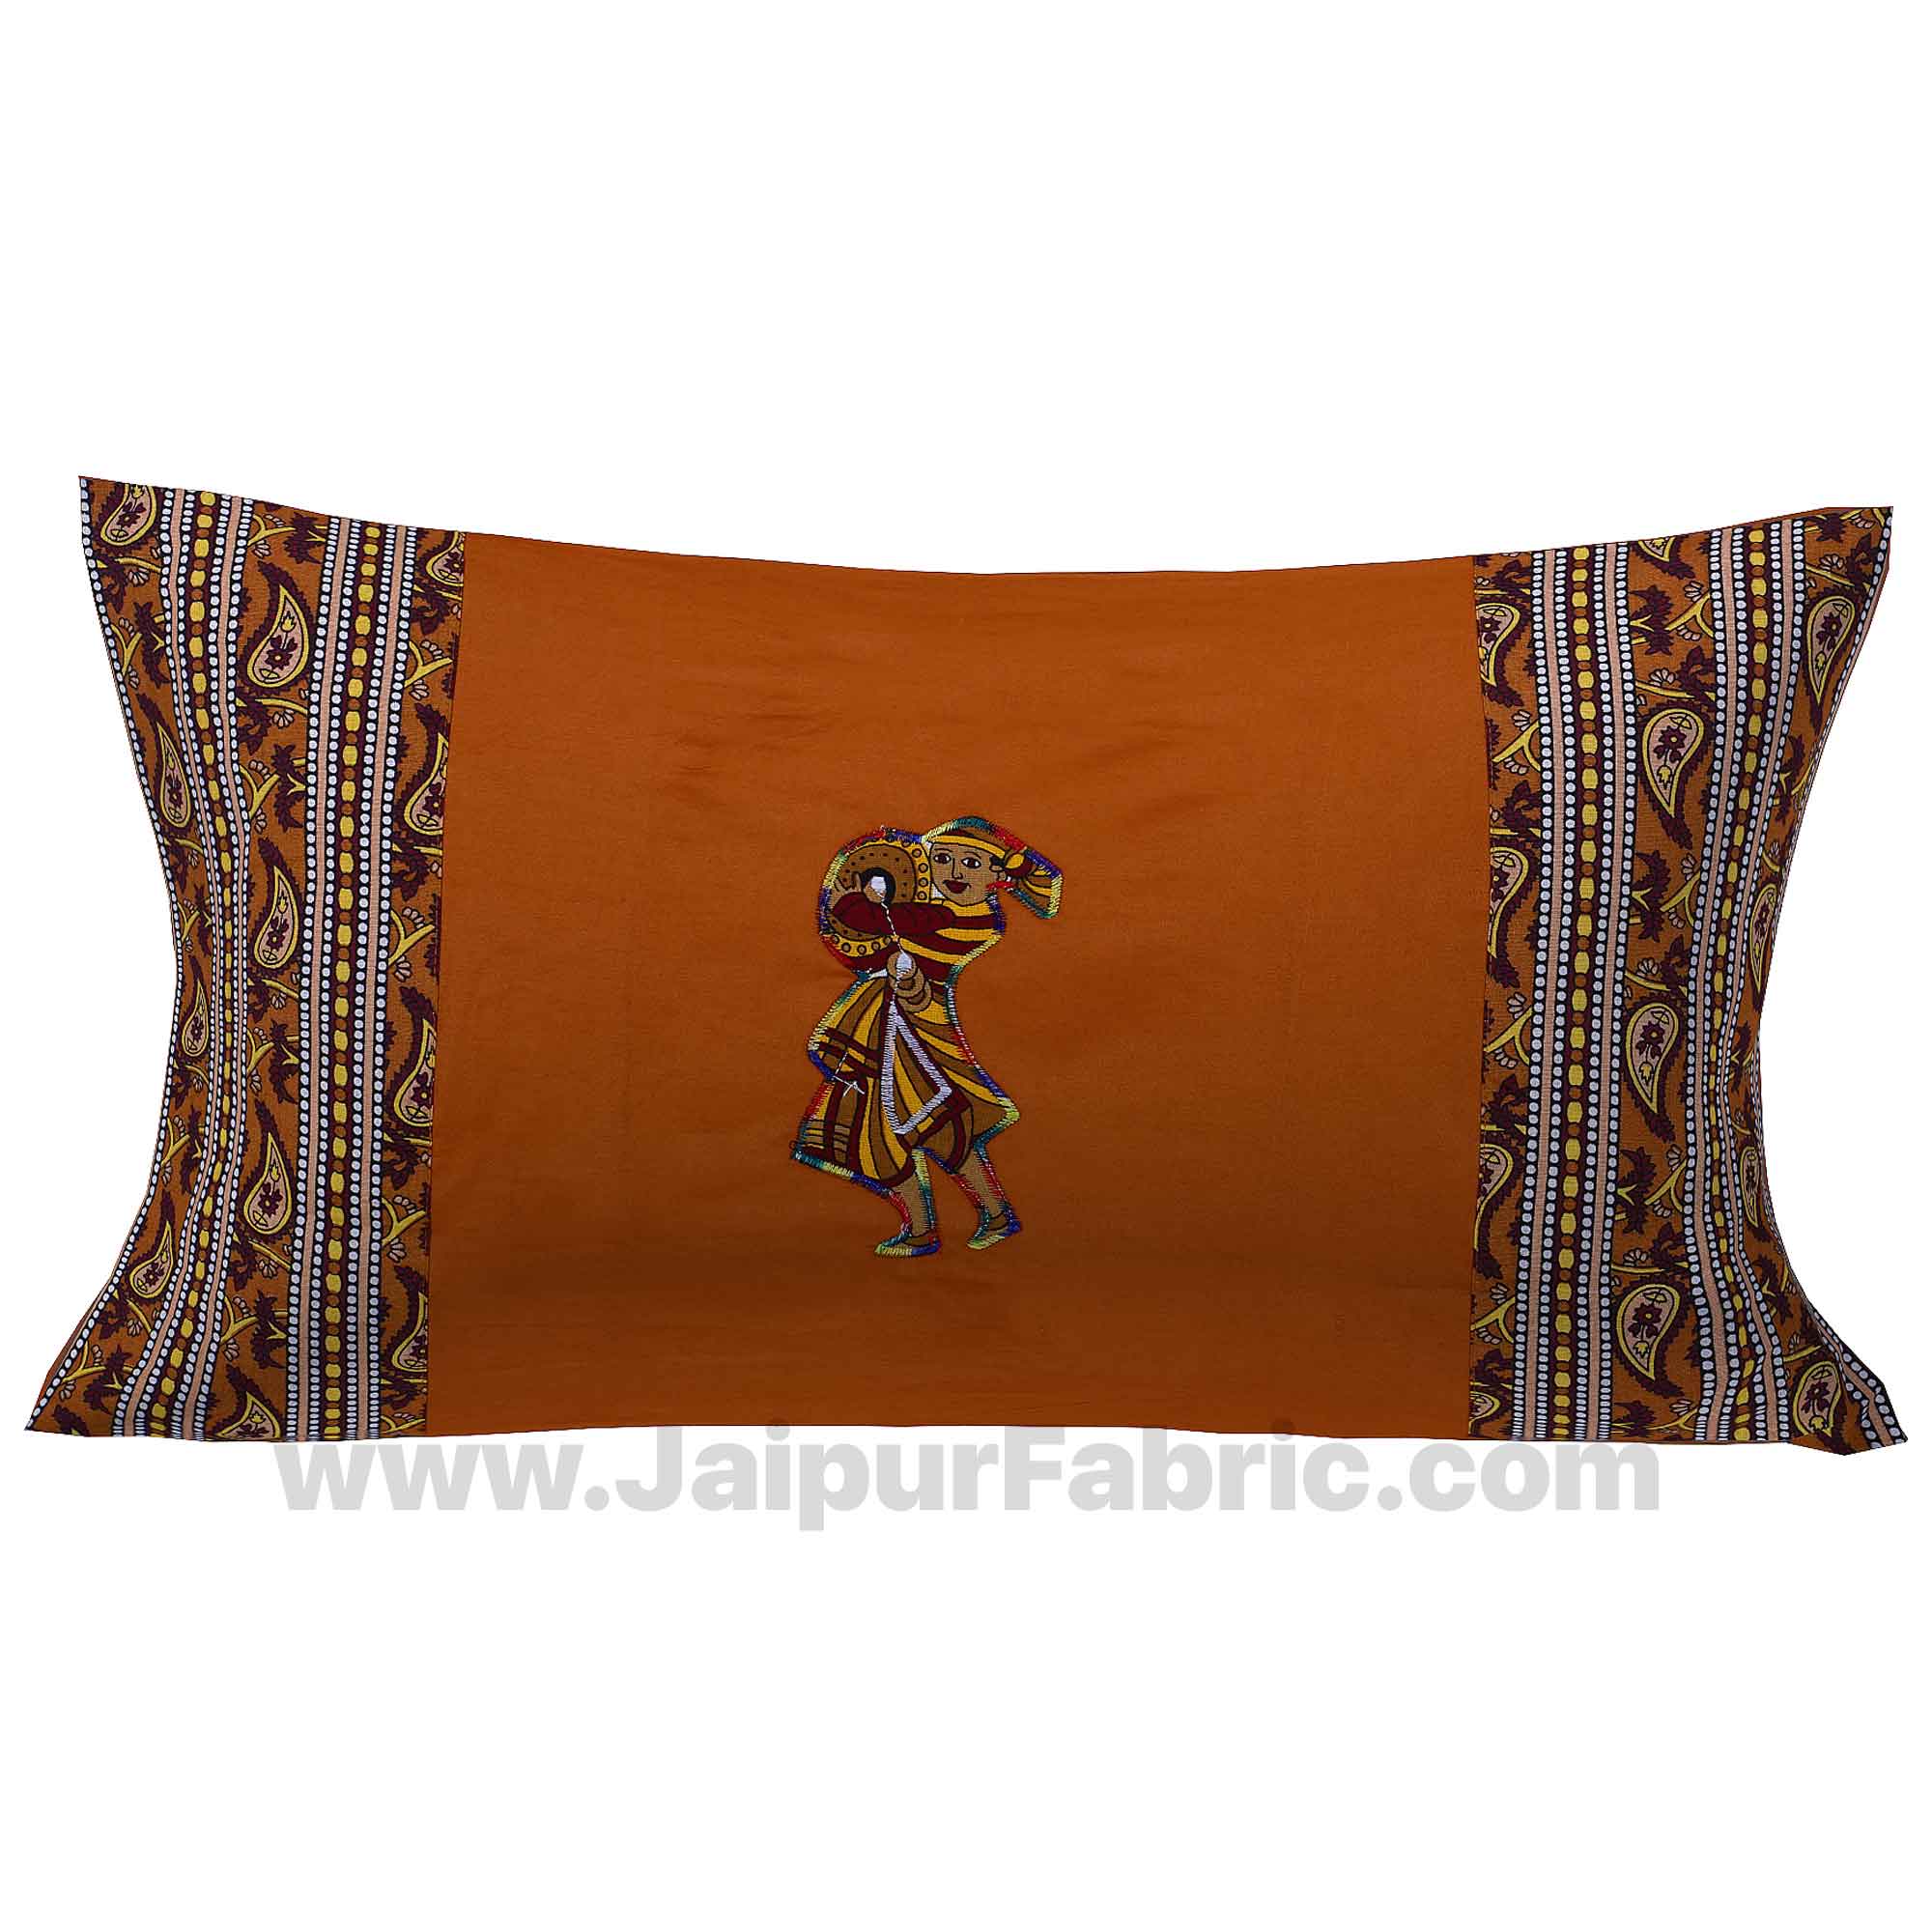 Applique Mustard Chang Dance Jaipuri  Hand Made Embroidery Patch Work Single Bedsheet